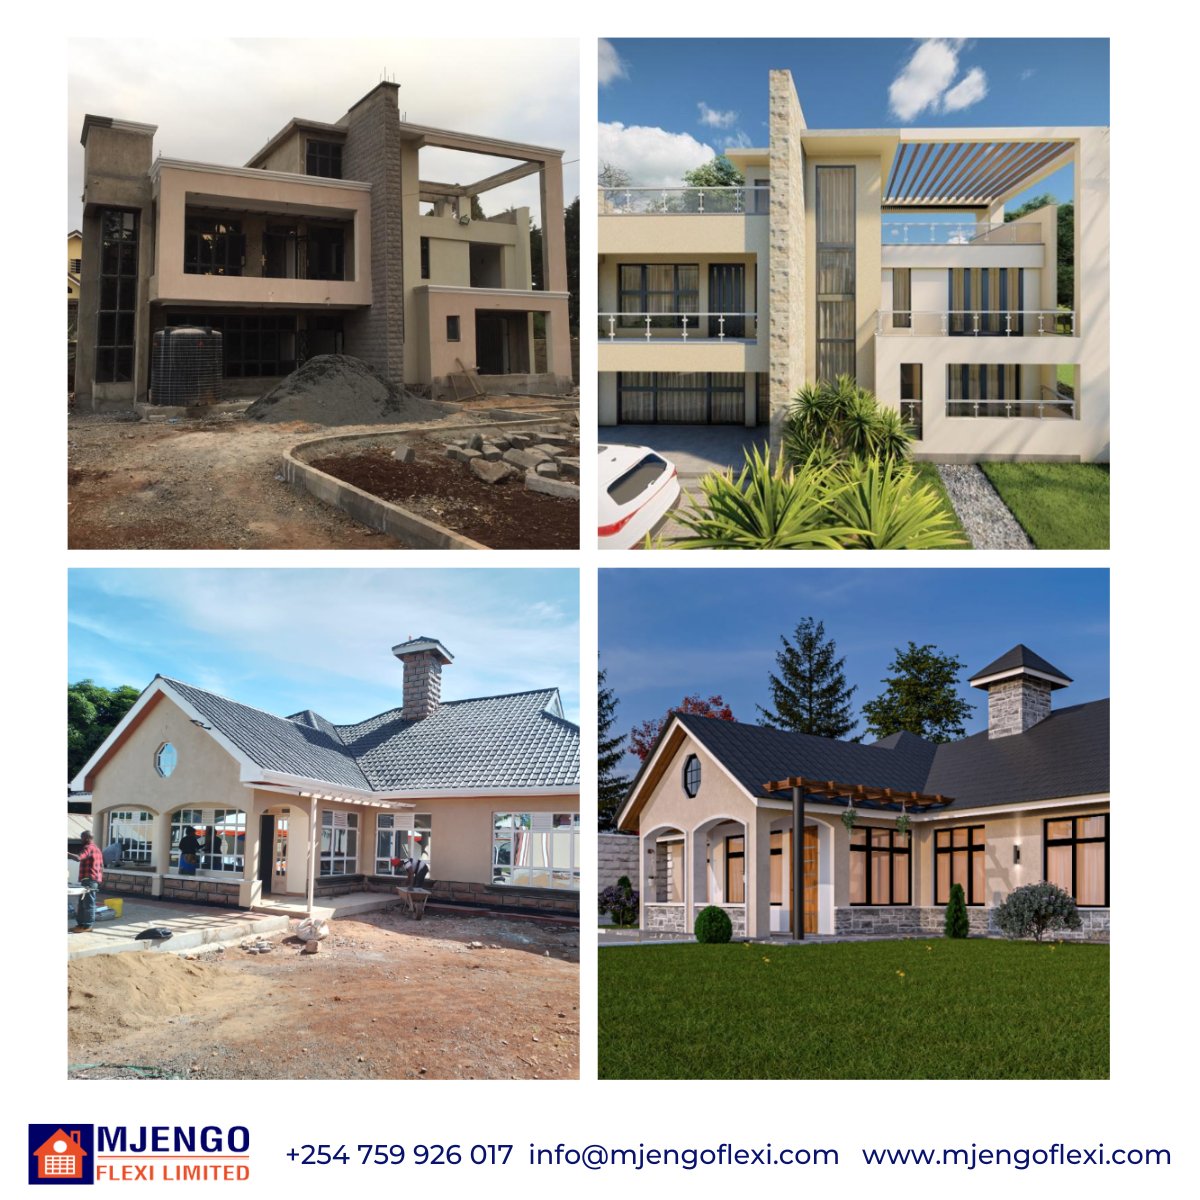 Another week to remind you that we excel in turning your innovative ideas and concepts into tangible results, all within your budget. 

Get in touch with us, and let's explore how we can make your dream project a reality

#BudgetBuilds #AffordableConstruction #ValueForMoney